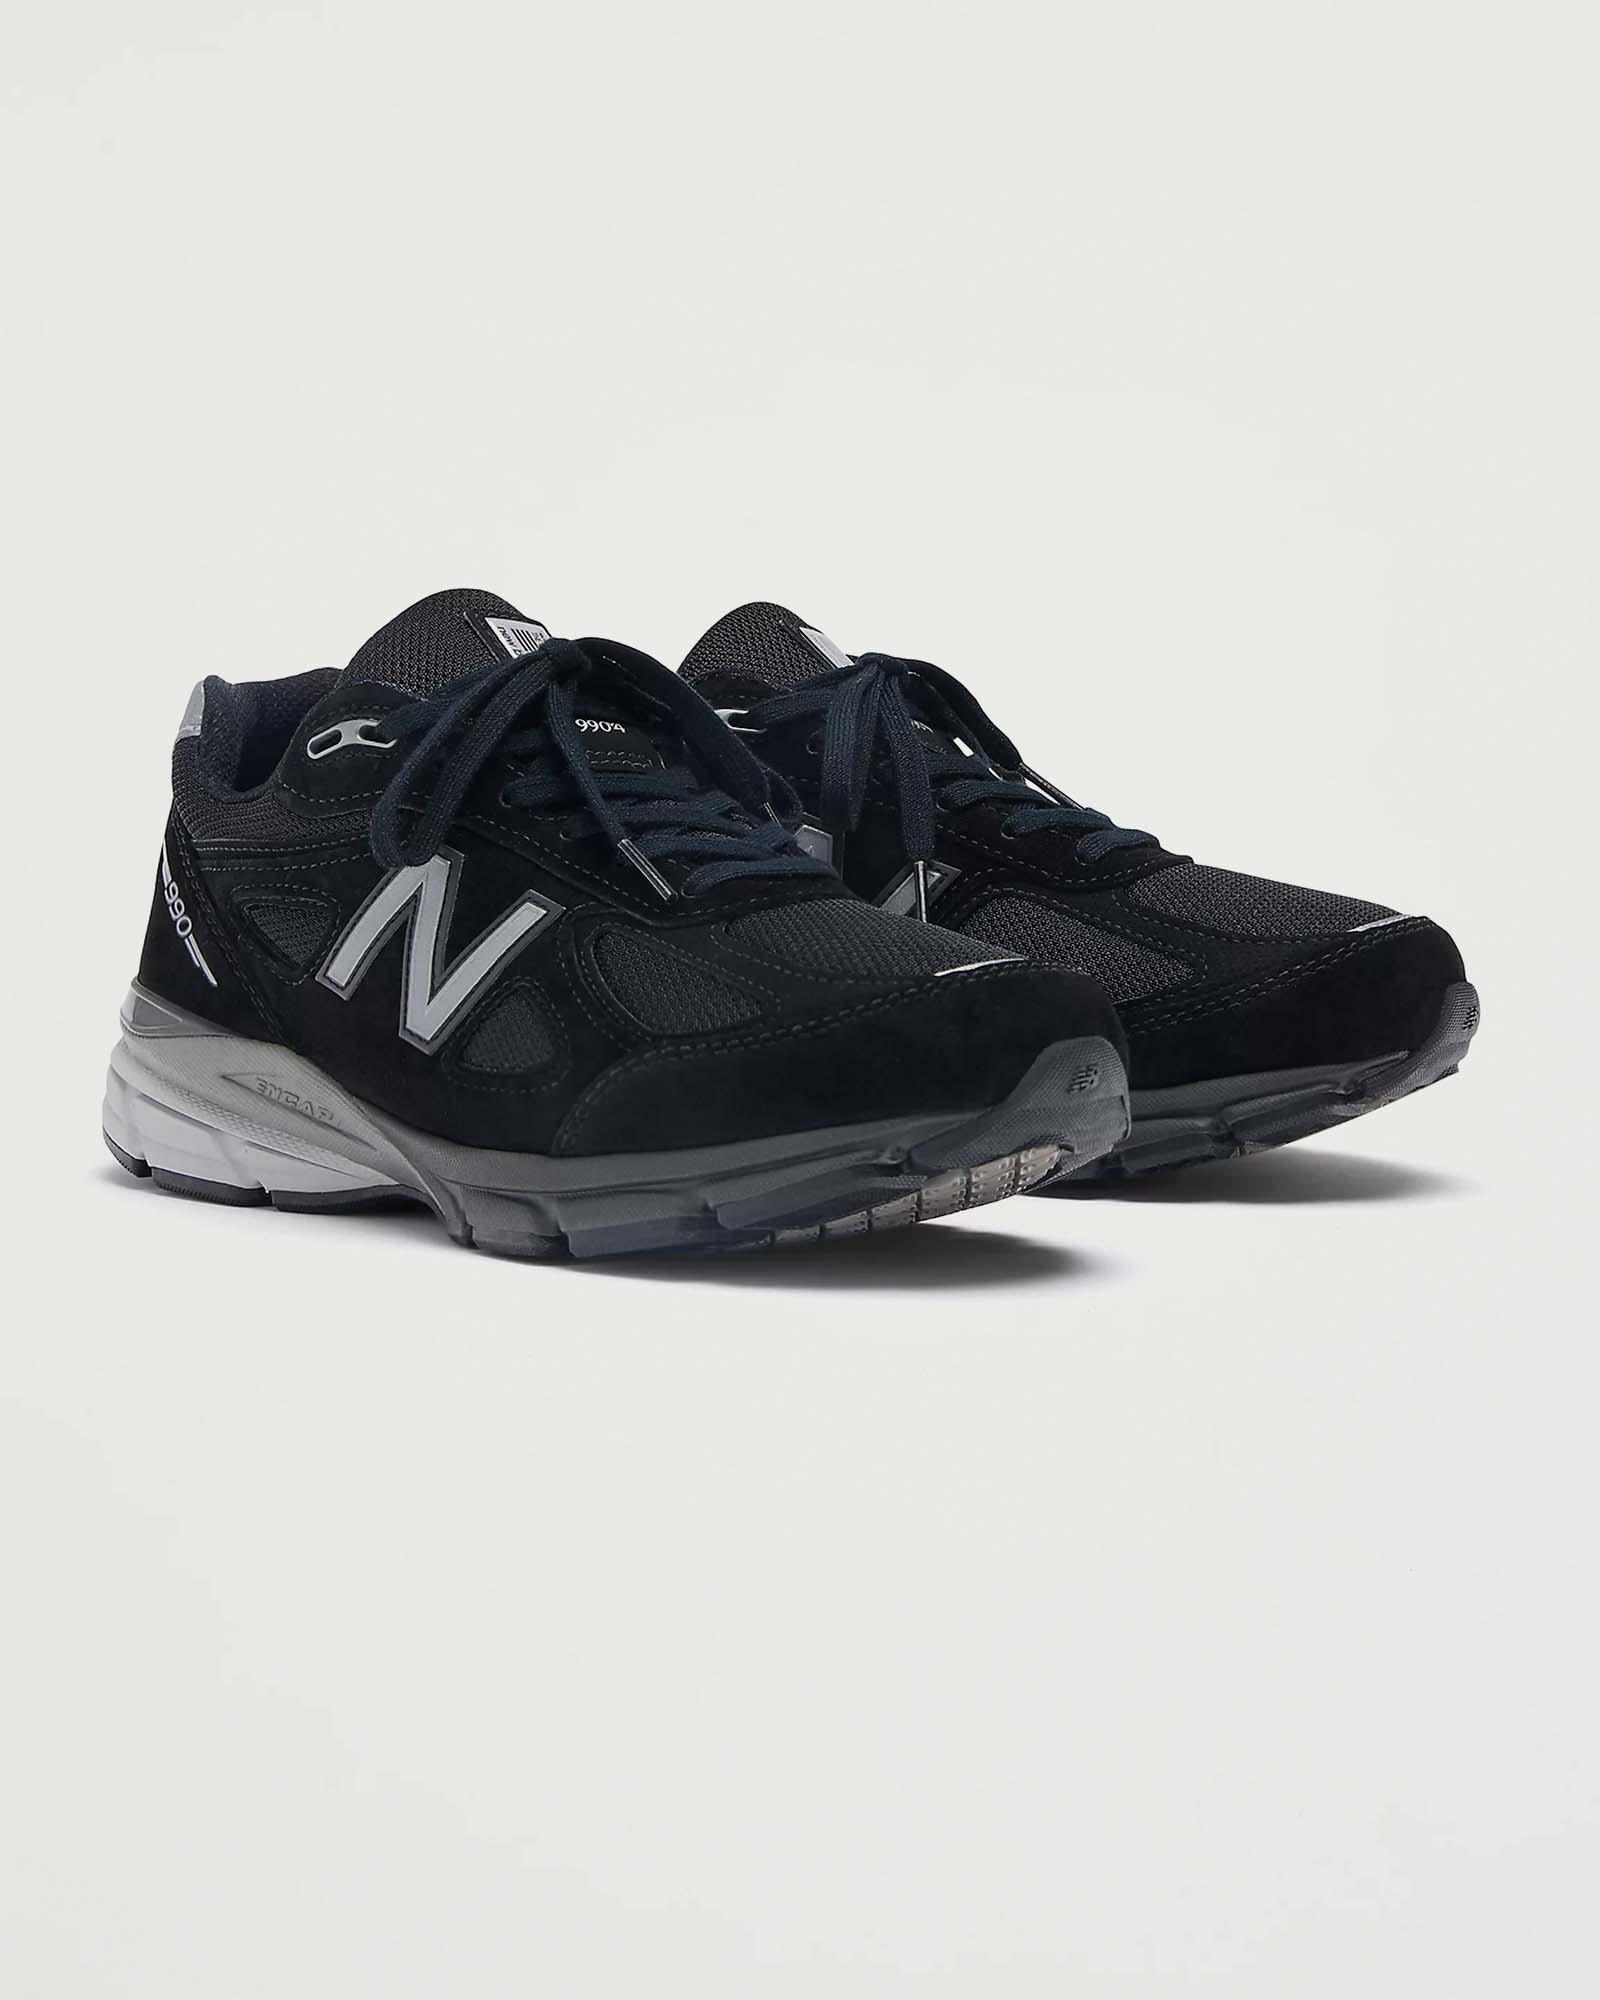 New Balance 990v4 'Made in USA' Black Shoes Sneakers Unisex